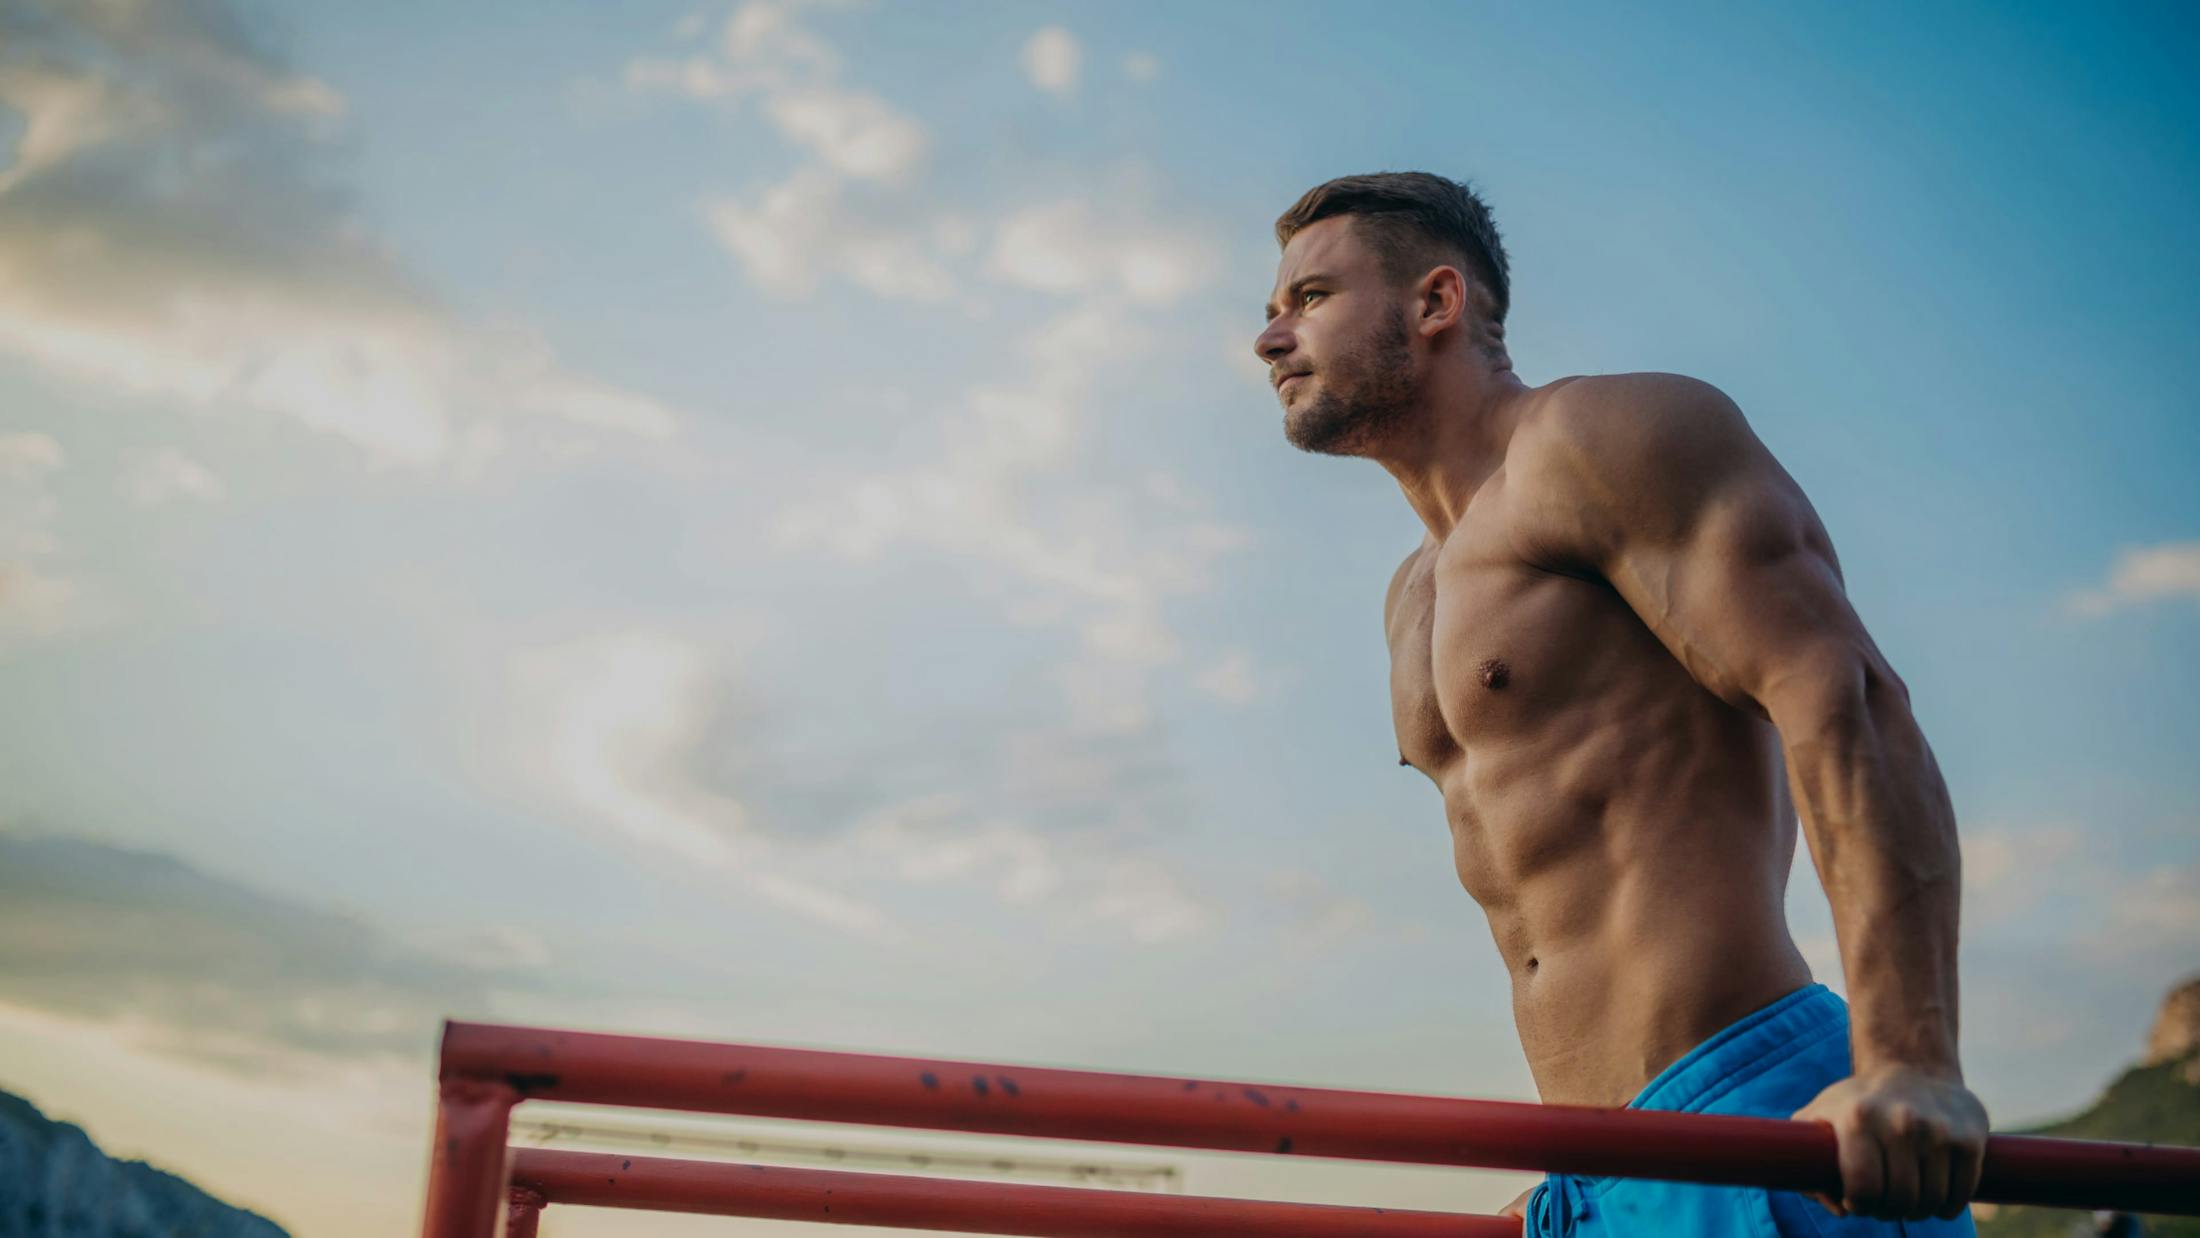 Man working out outdoors